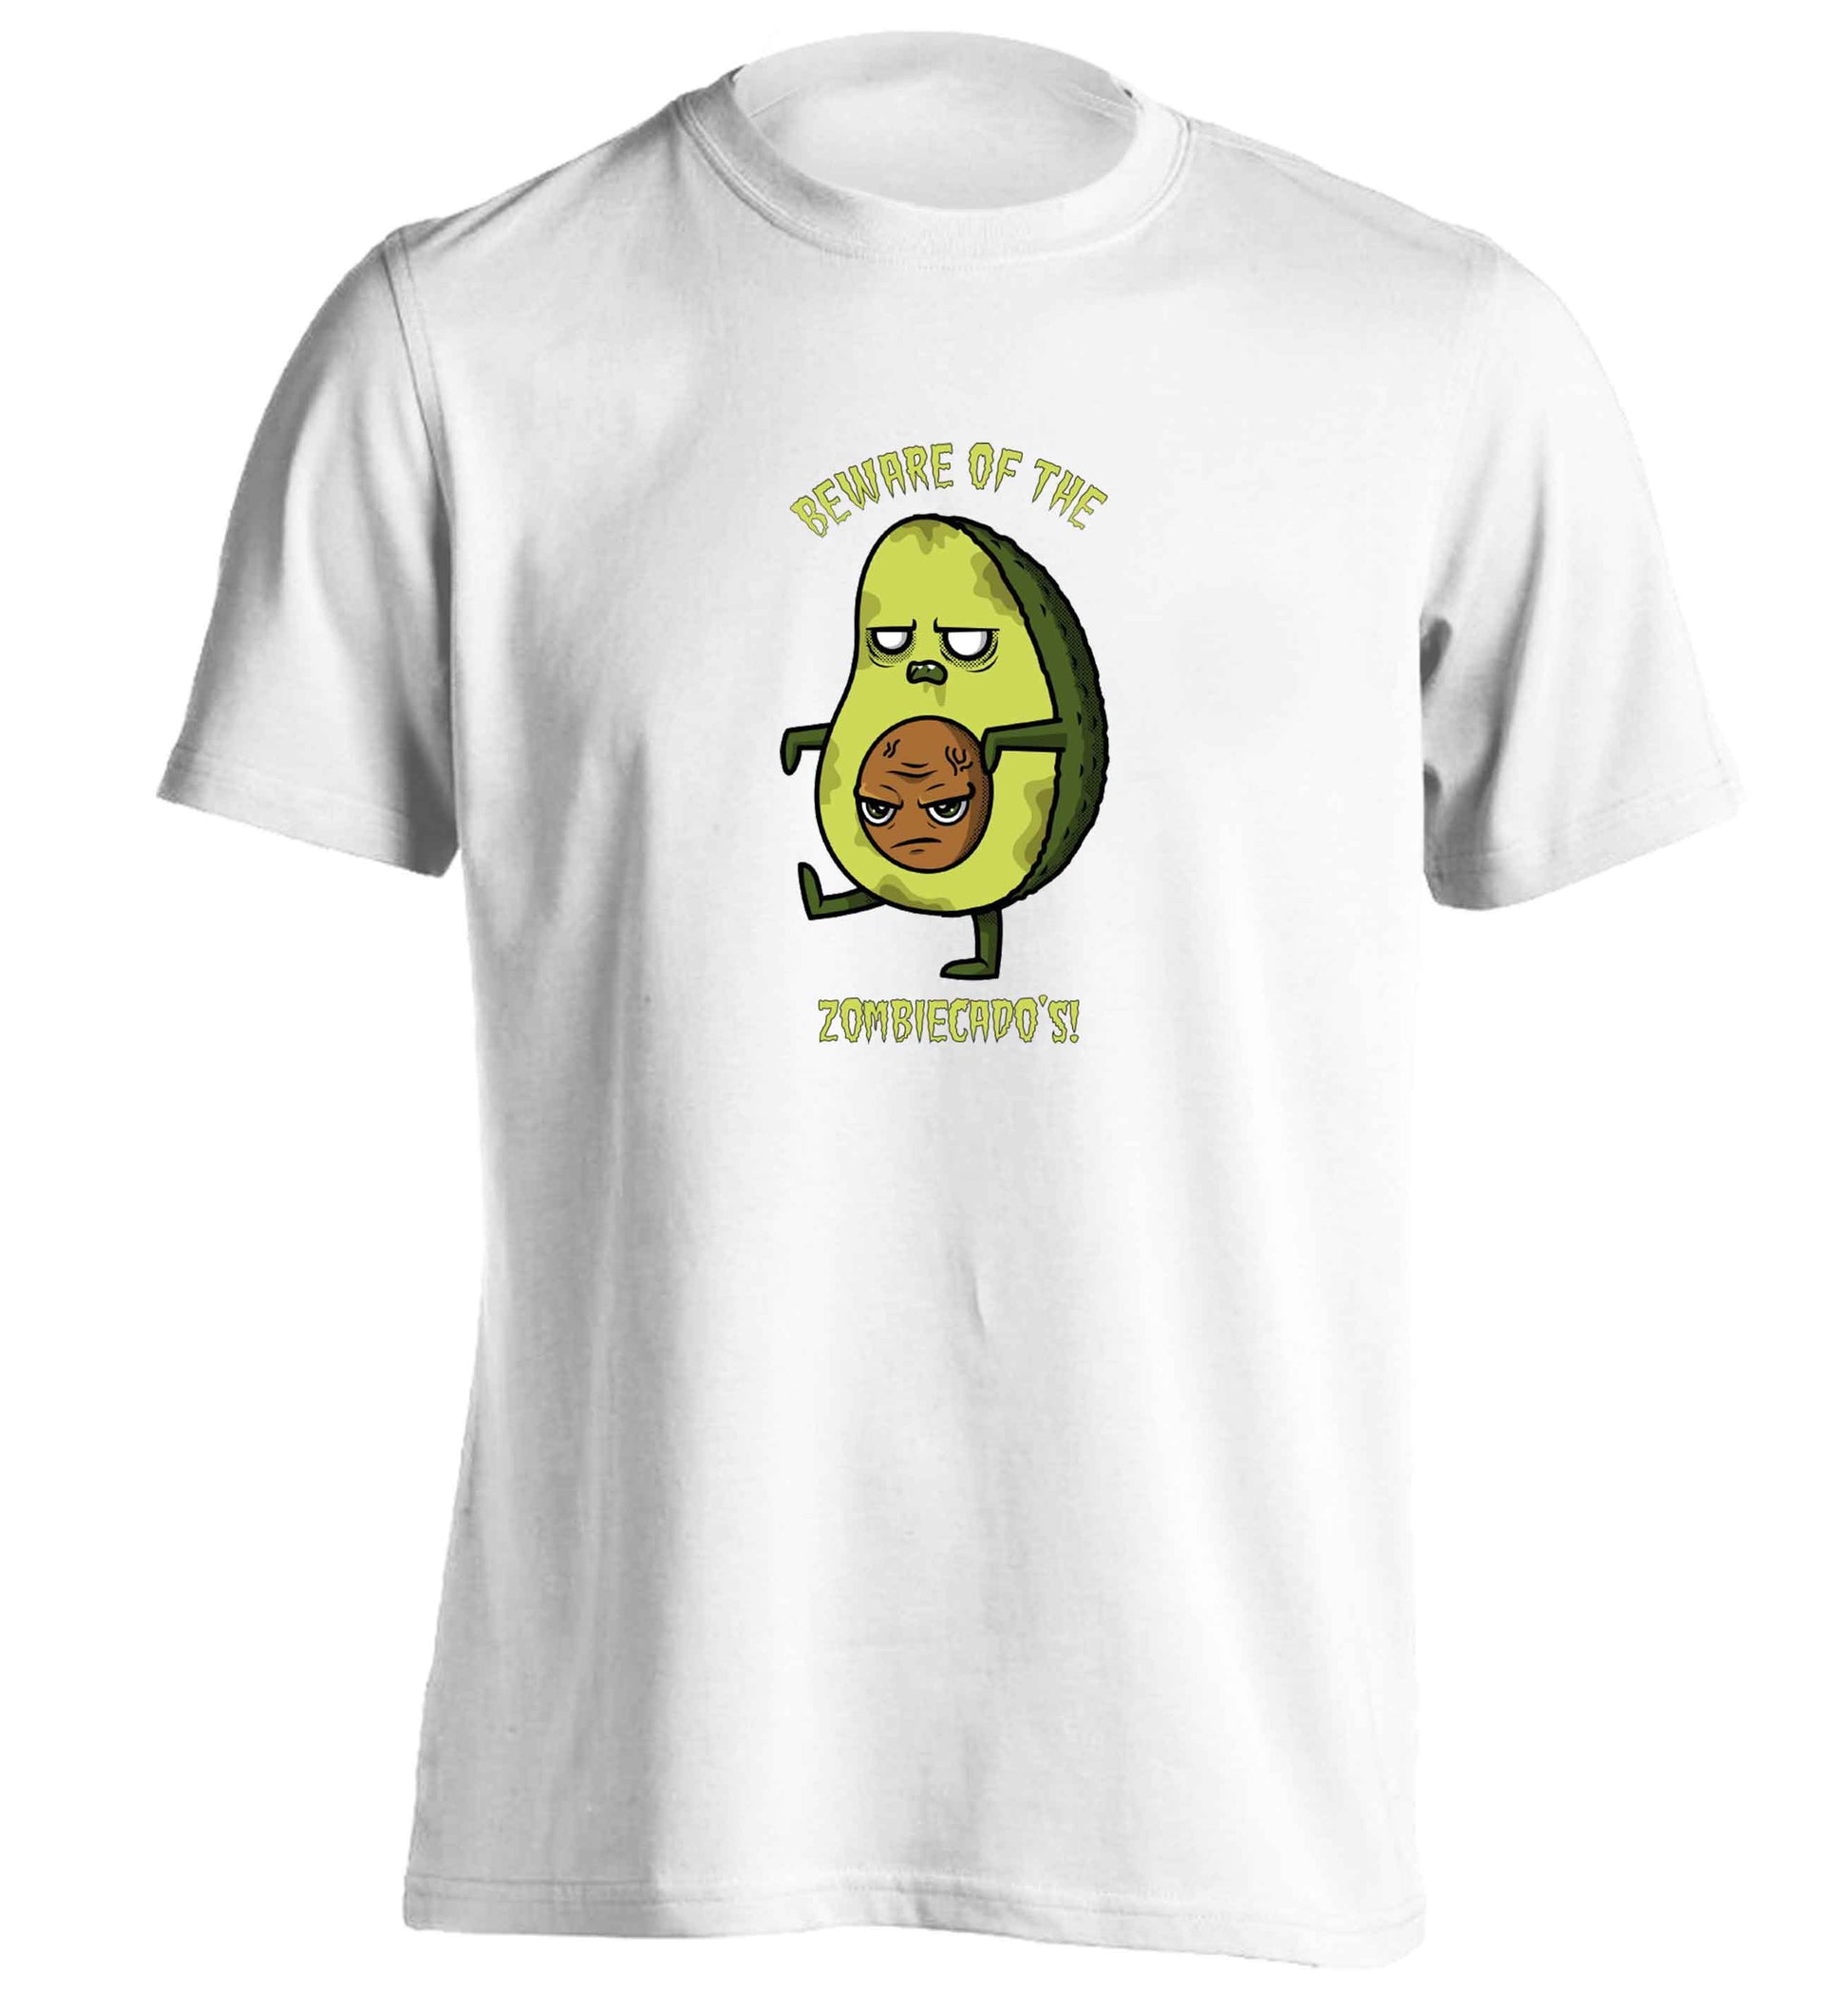 Beware of the zombicado's adults unisex white Tshirt 2XL